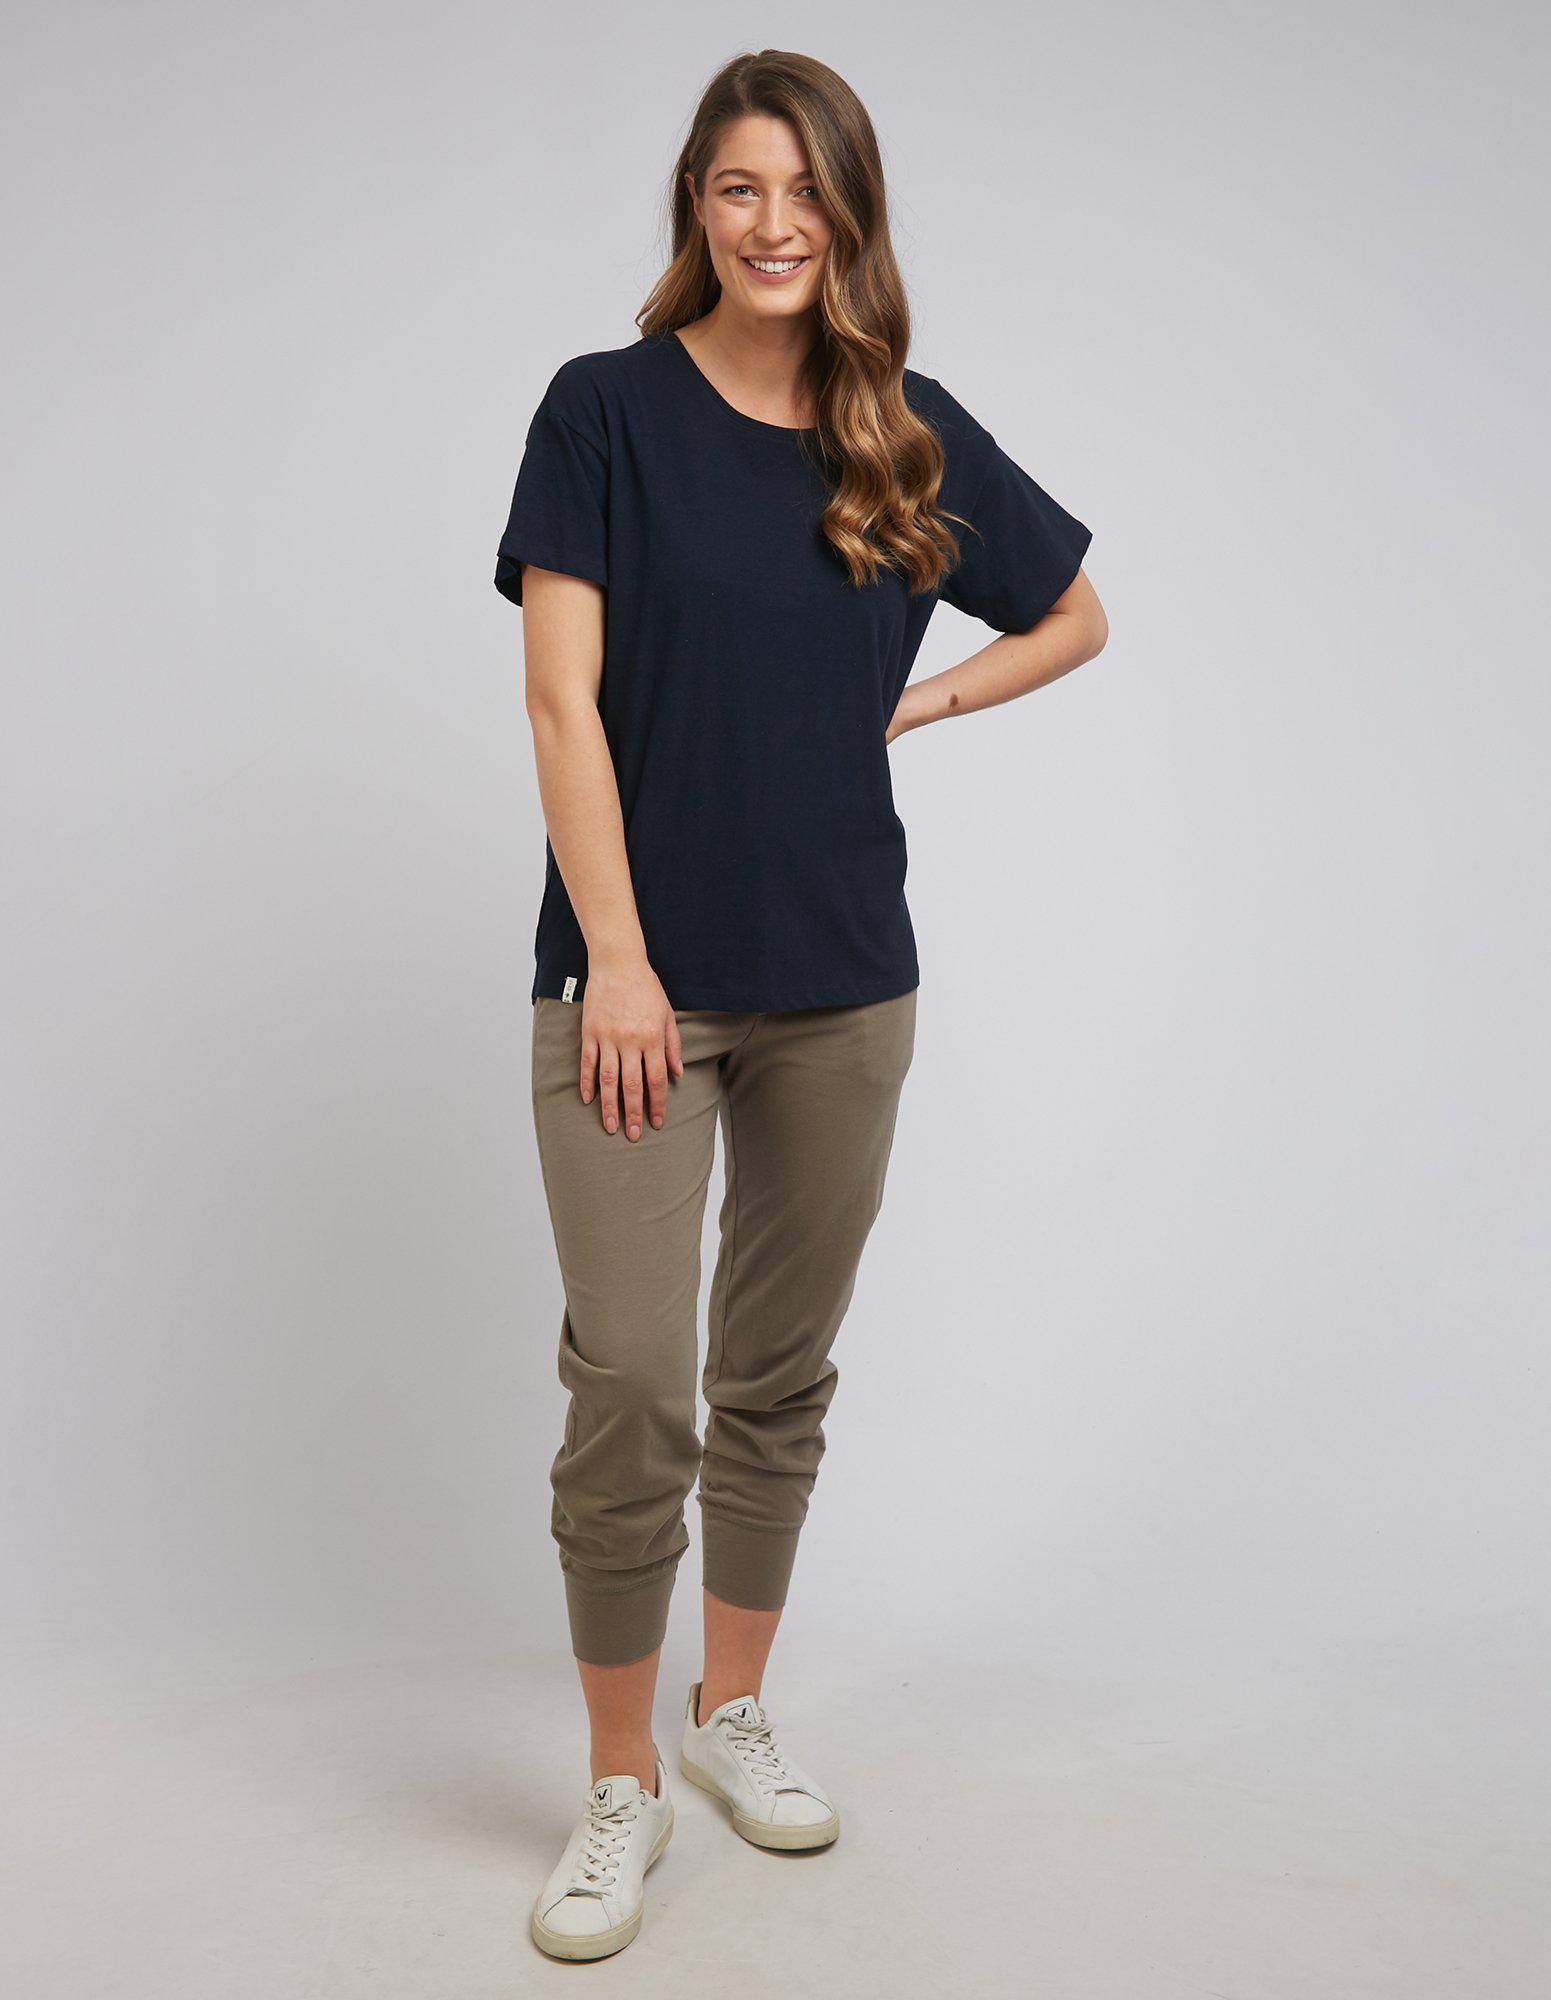 Clover S/S Tee - Navy - Elm Lifestyle - FUDGE Gifts Home Lifestyle